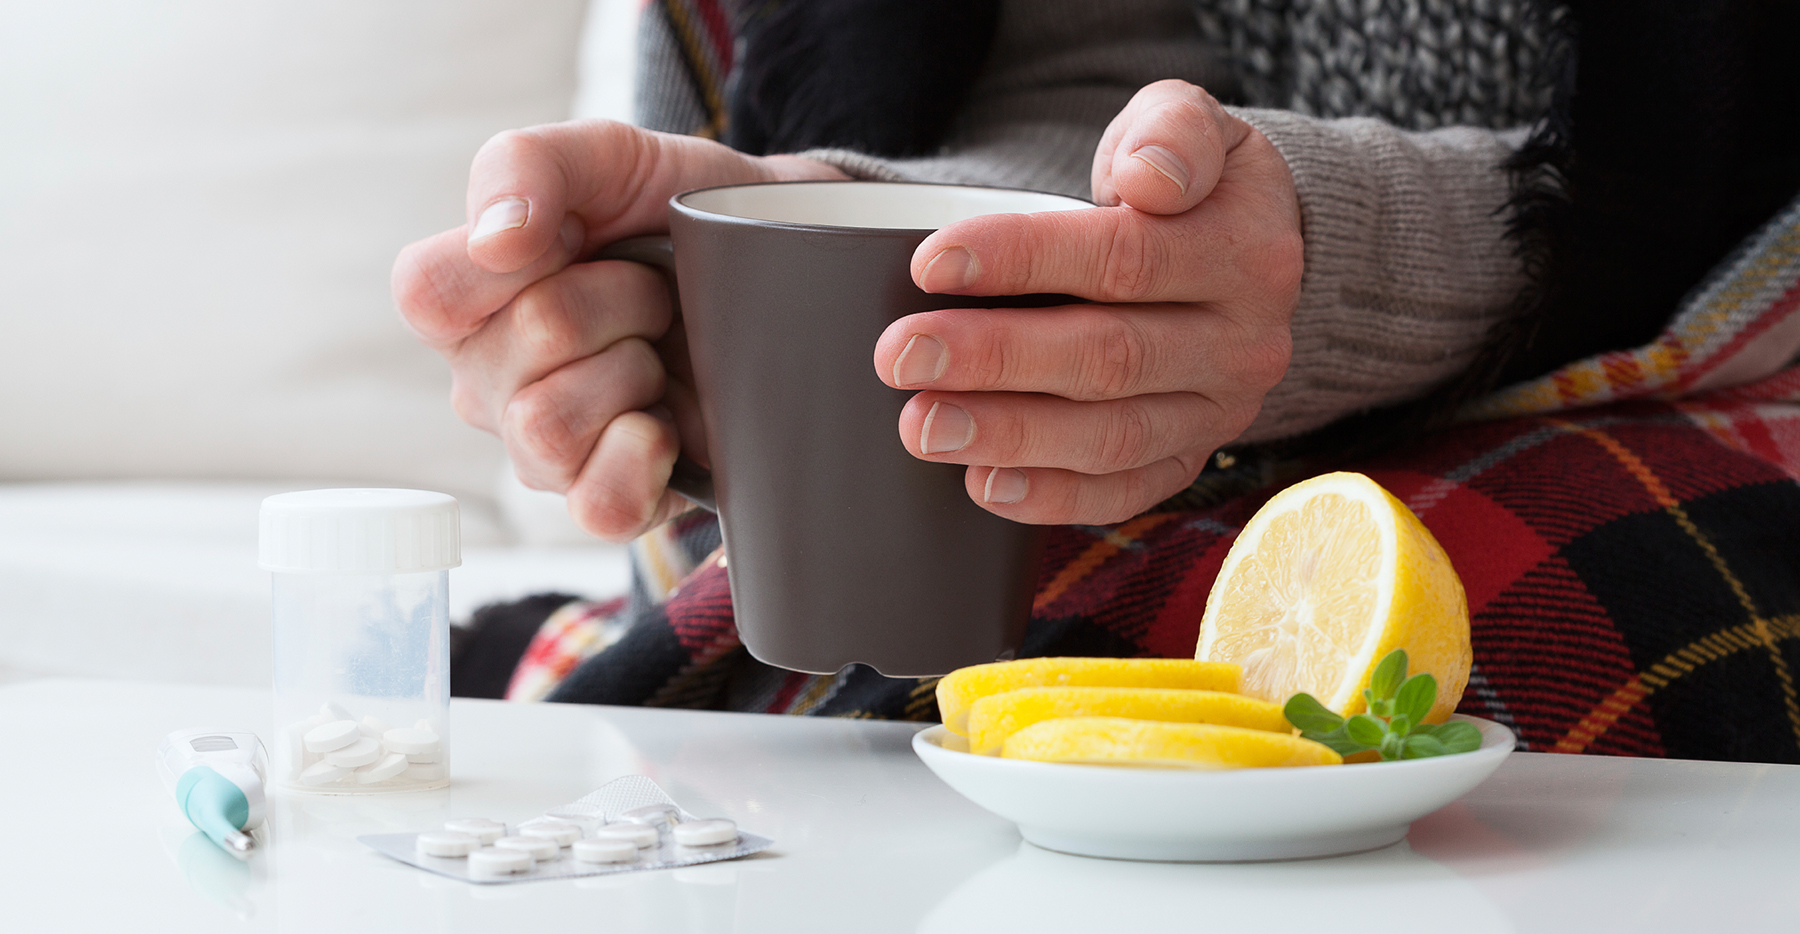 sore throat remedies: the 11 best natural cures that actually work